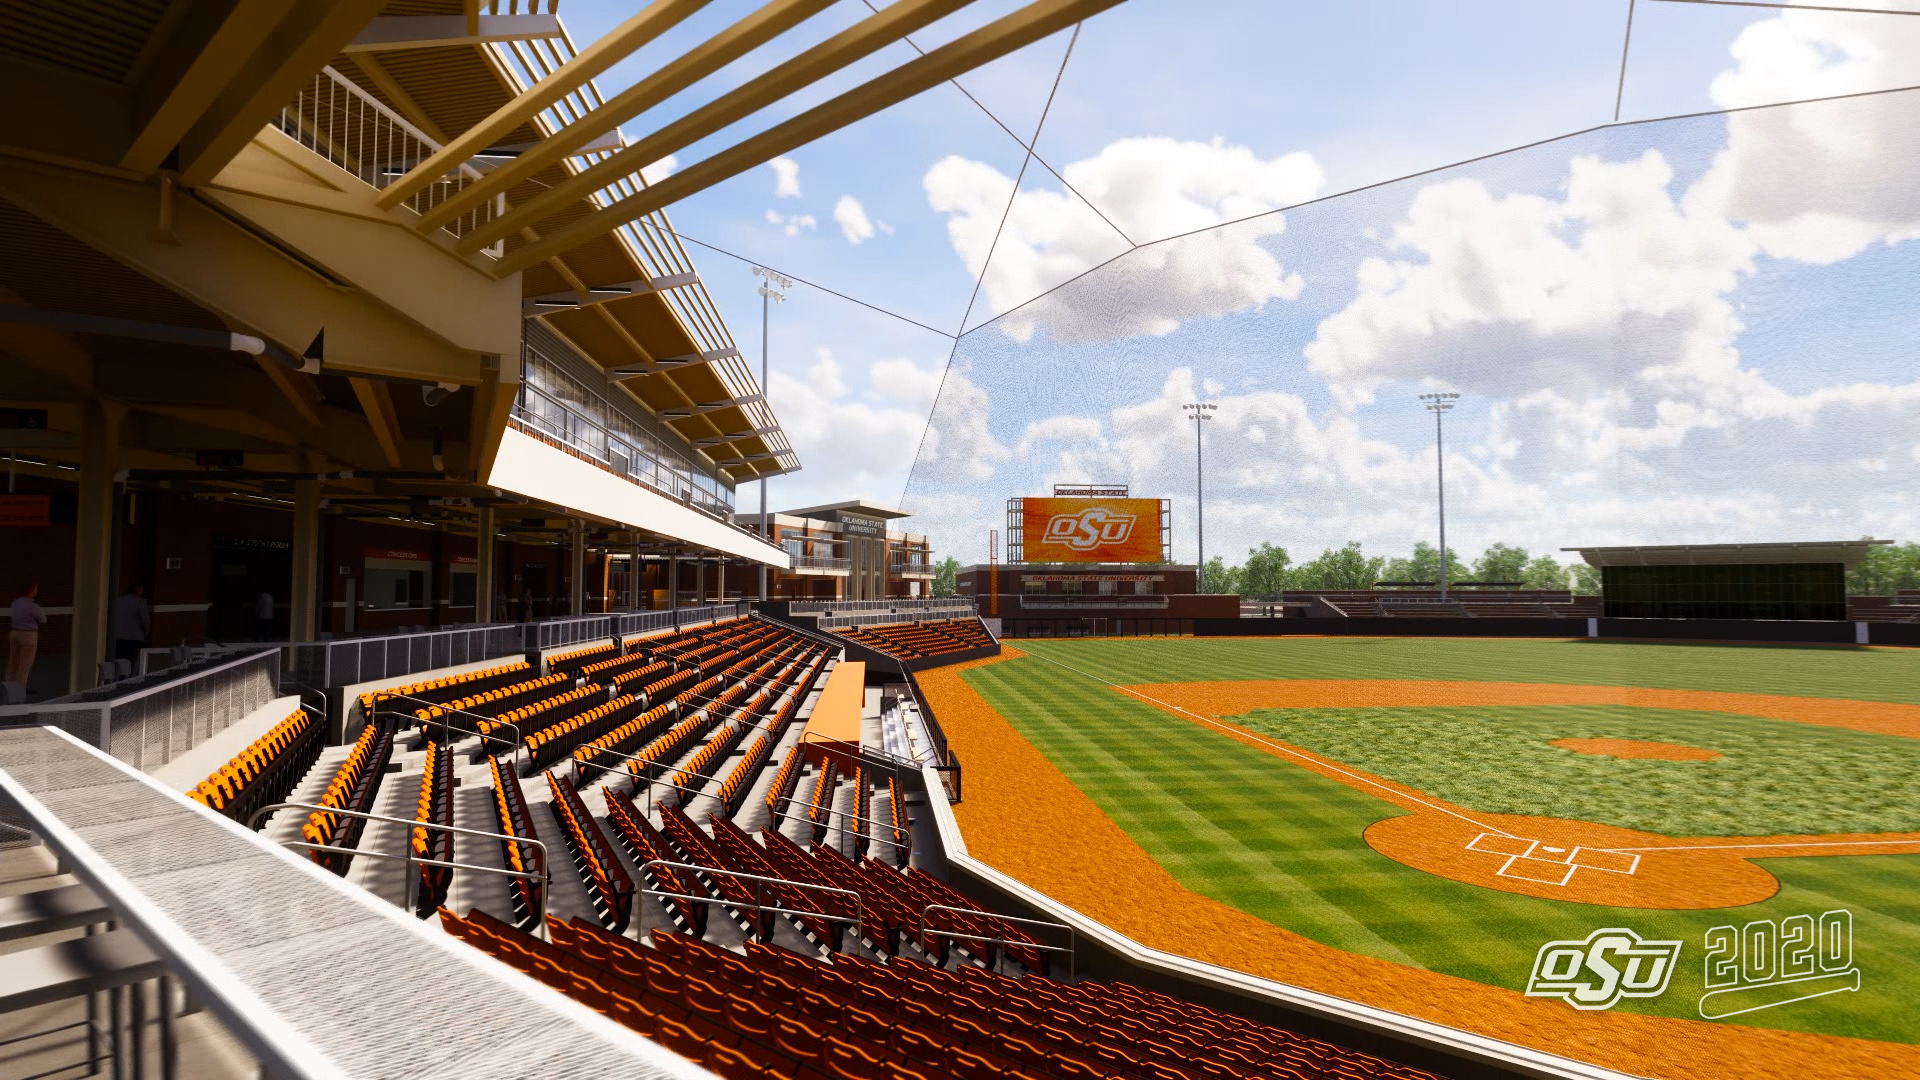 Oklahoma State Unveils New Ballpark Project for 2020